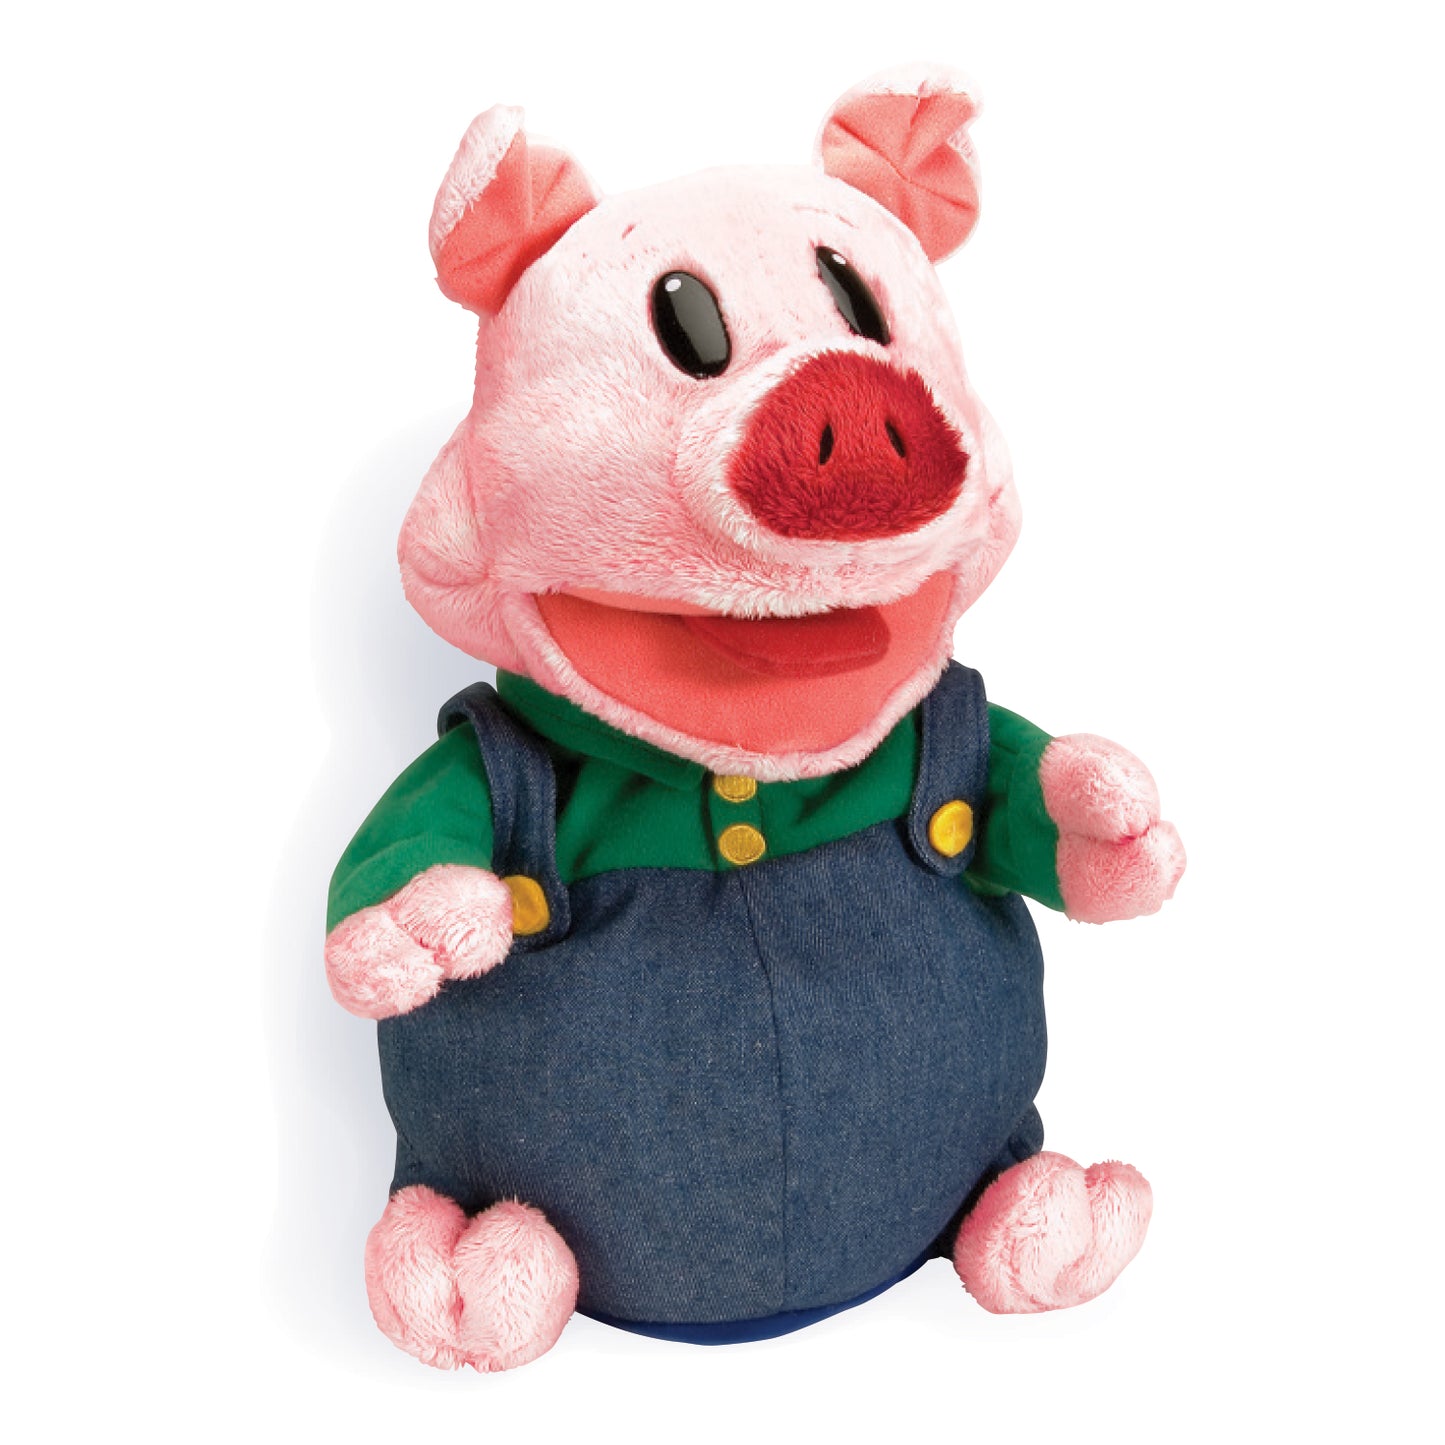 Fisher-Price Peppa Pig Puppet Show 